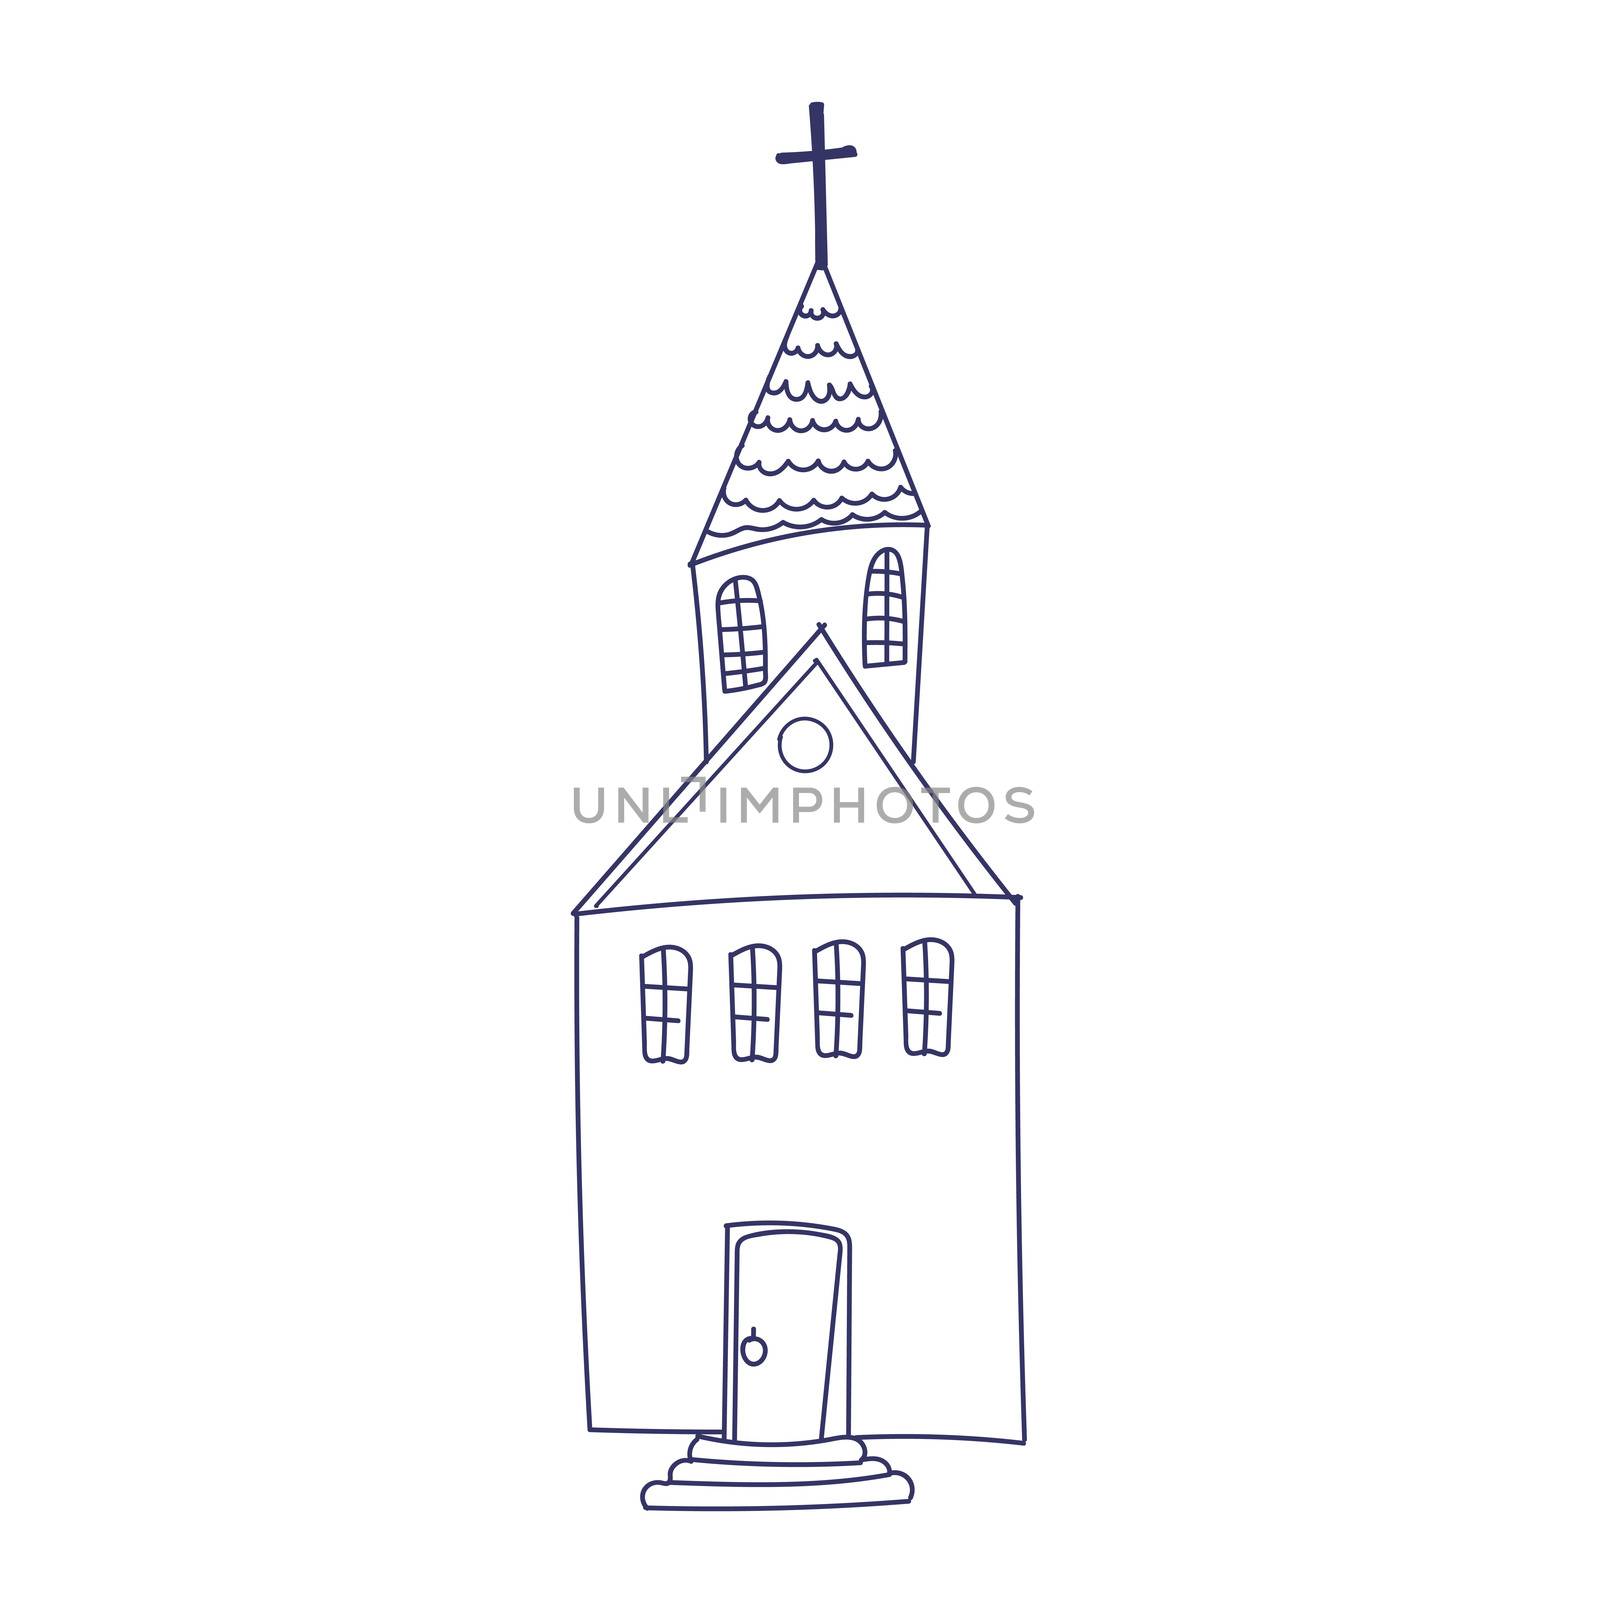 Hand drawn doodle Christian building church icon with Catholic cross illustration sketchy traditional symbol Cute cartoon religious concept element by zaryov